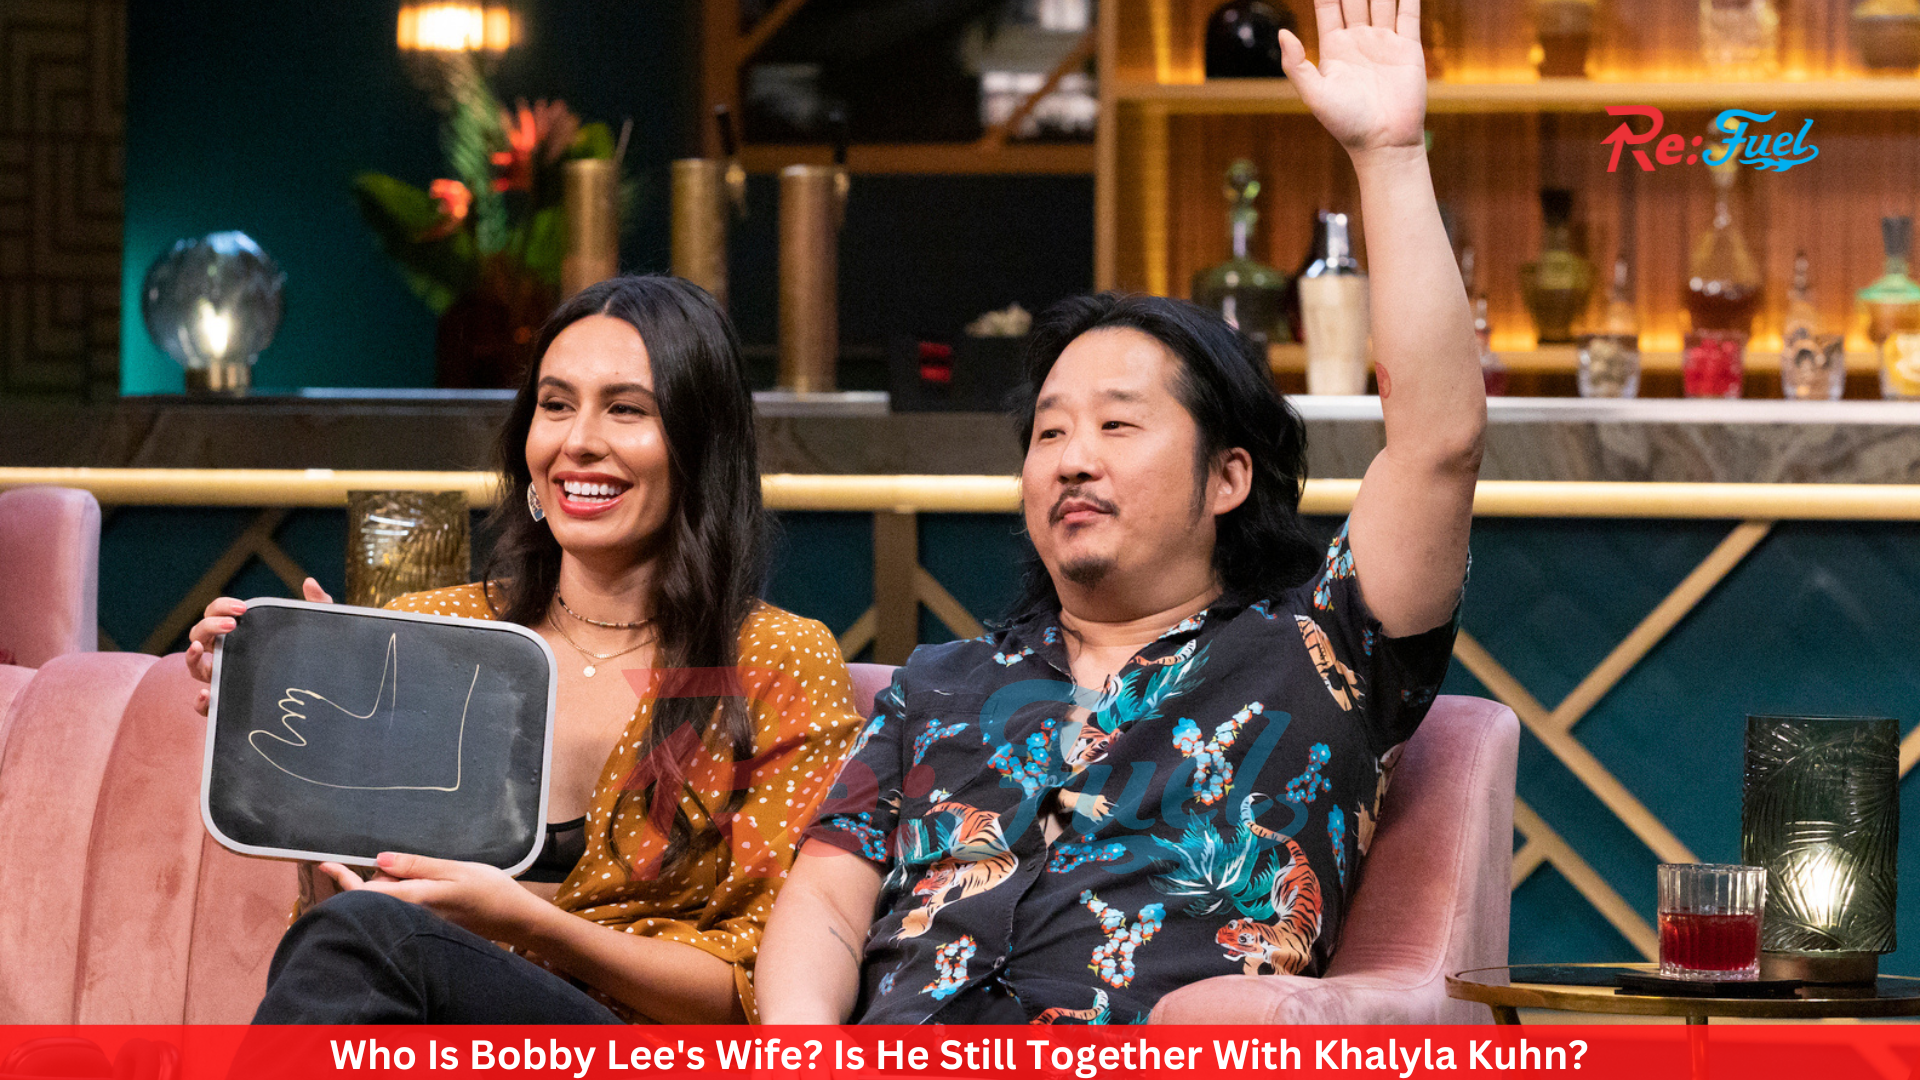 Who Is Bobby Lee's Wife? Is He Still Together With Khalyla Kuhn?